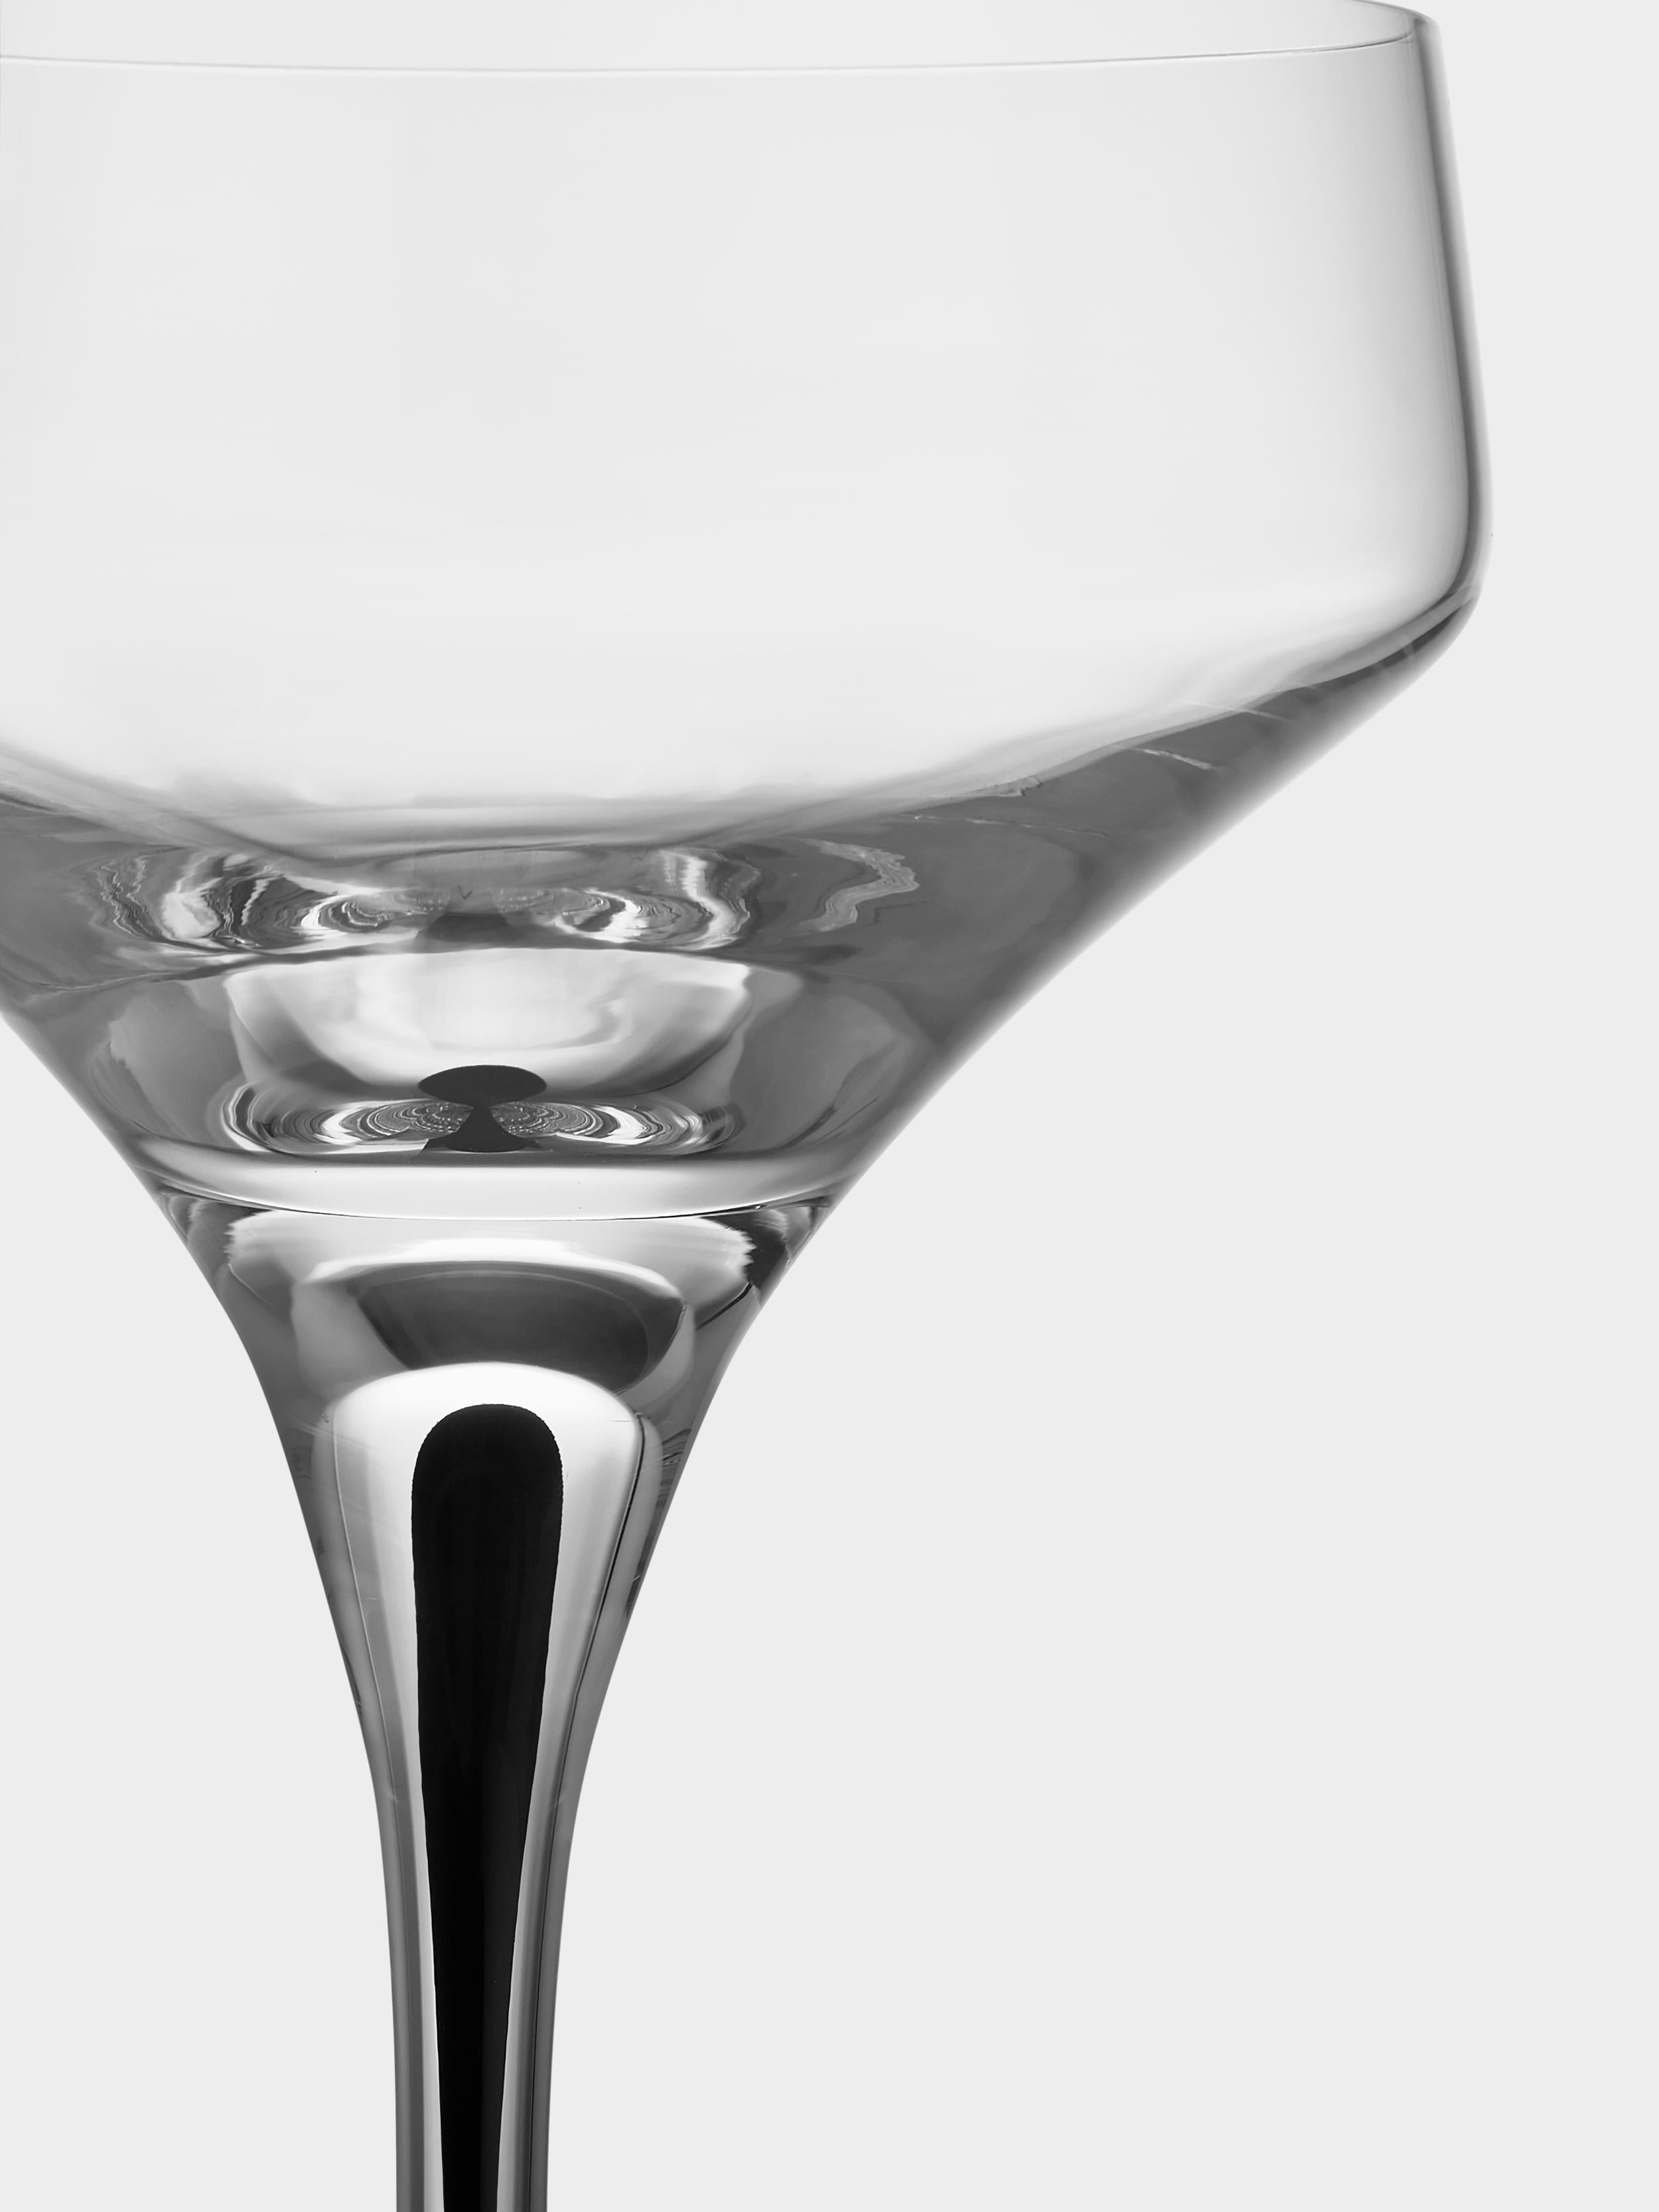 Metropol Coupe from Orrefors, which holds 8 oz, is ideal for sparkling beverages, as well as cocktails, with the wide bowl delivering elegance to the drink. It is also outstanding for serving smaller cold dishes or desserts. The coupe glass is